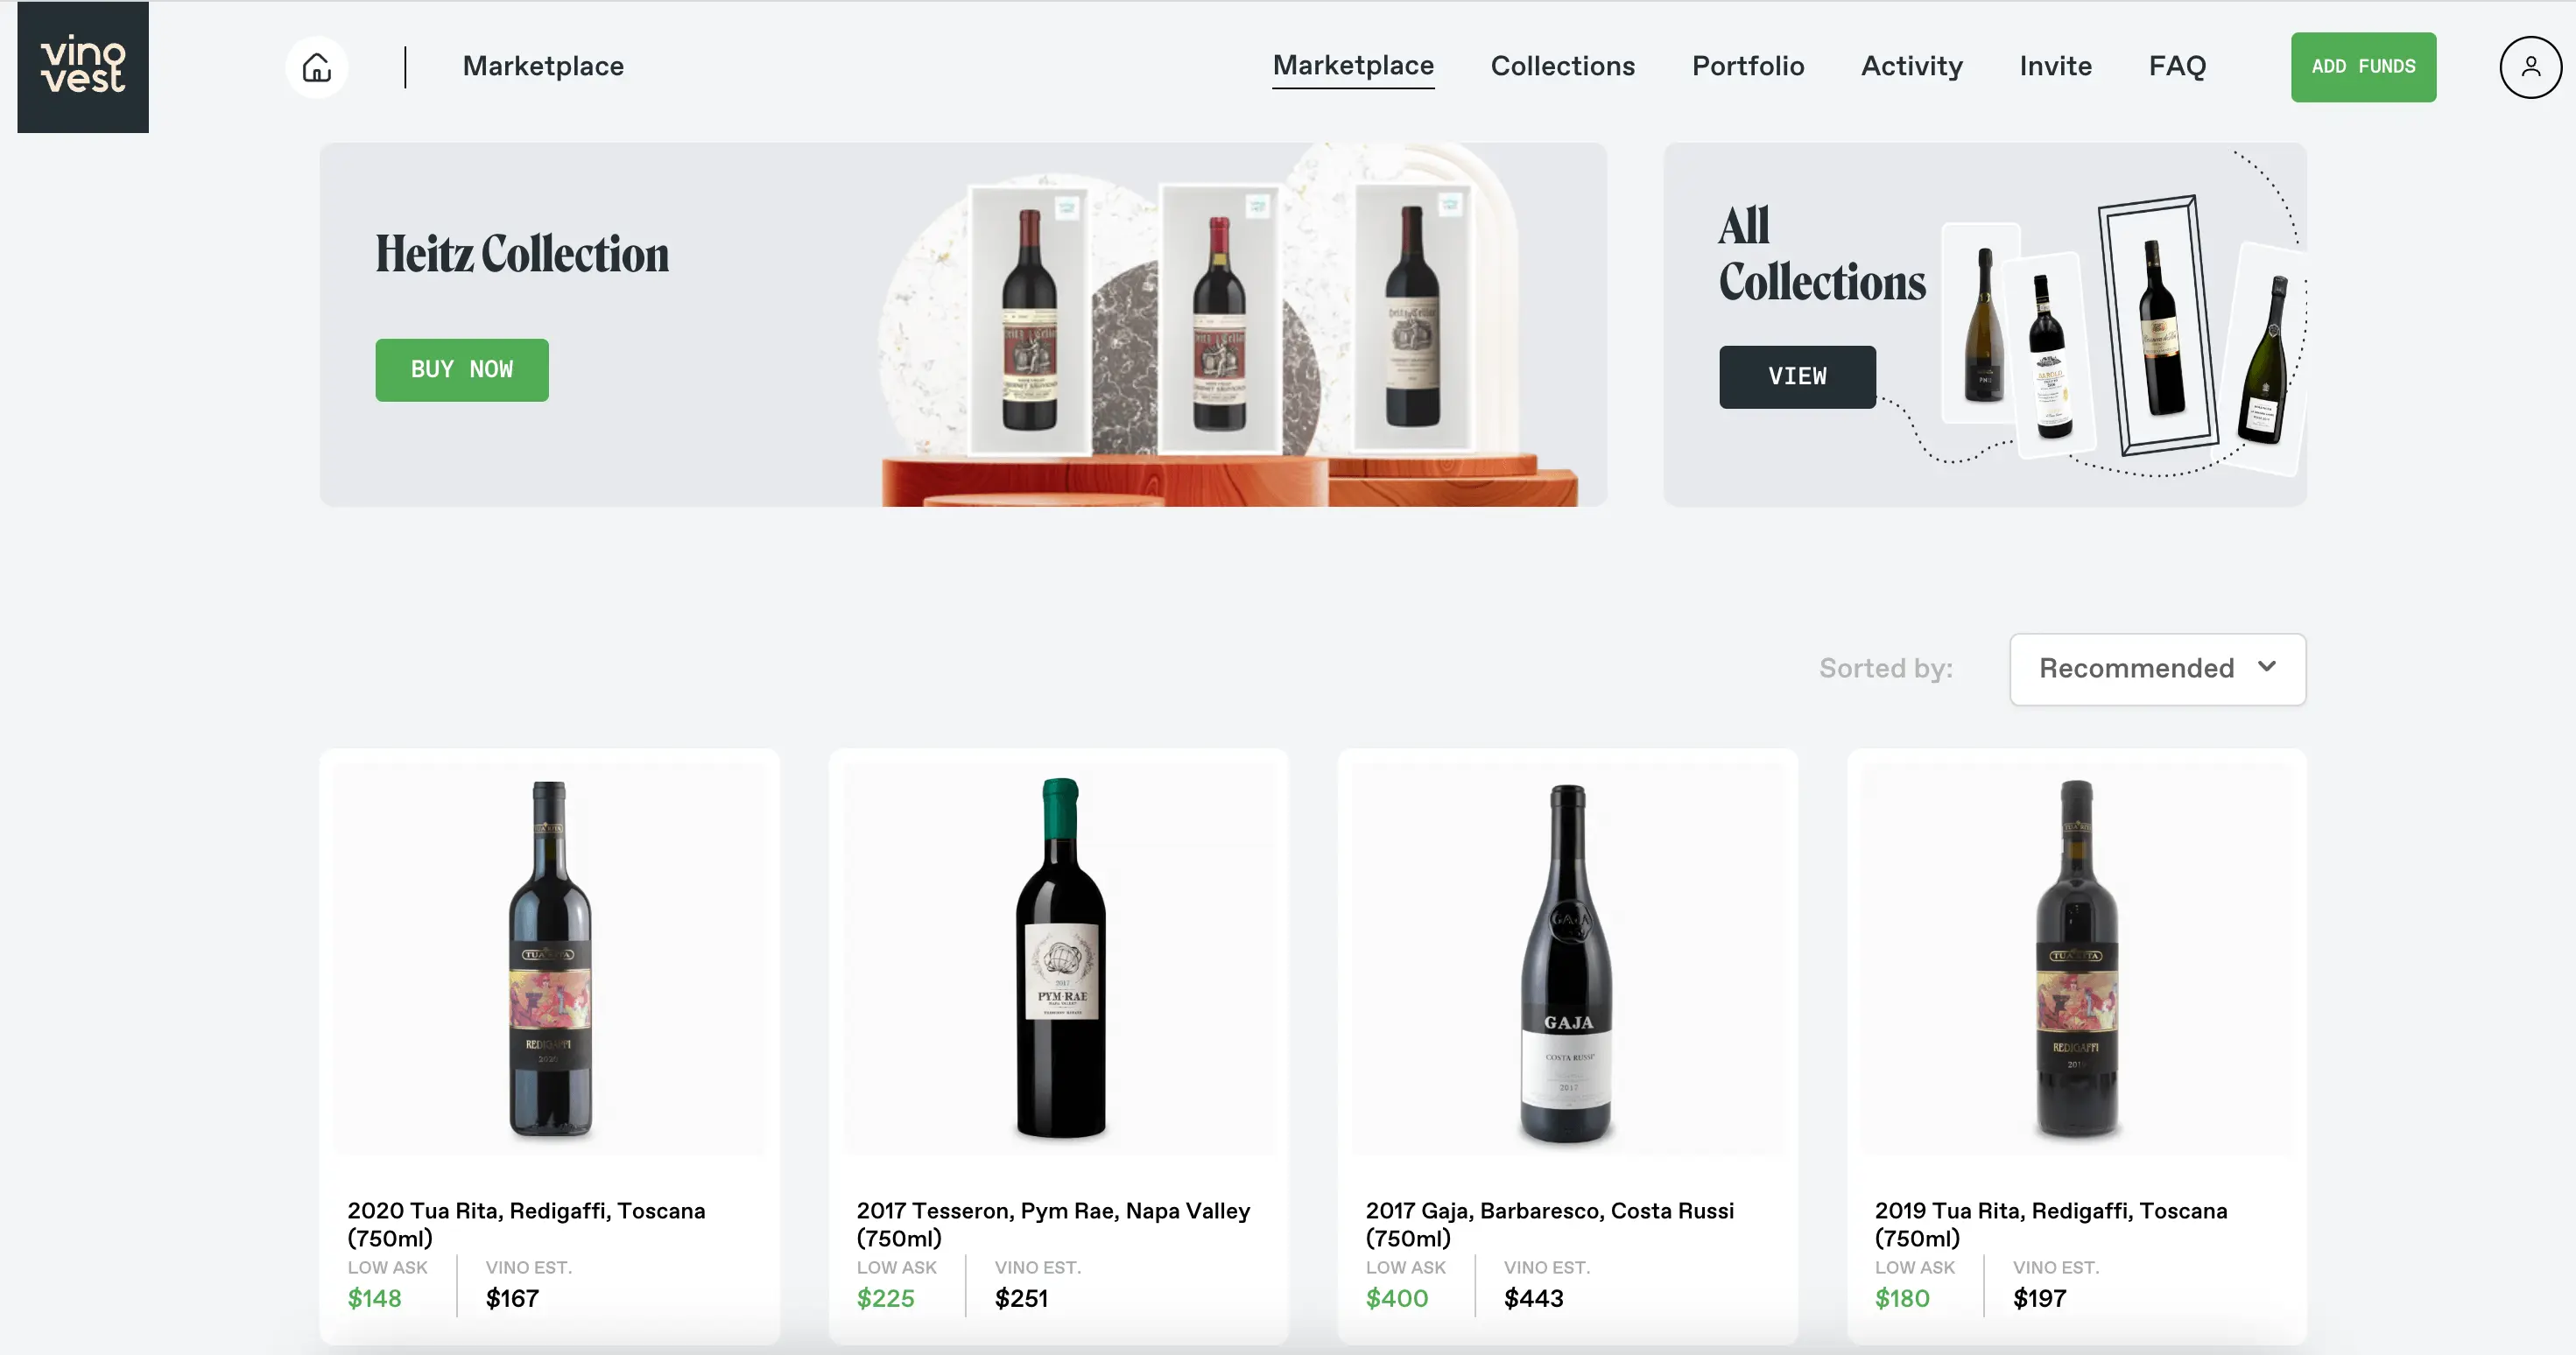 What Your Wine Portfolio Could Look Like at Vinovest